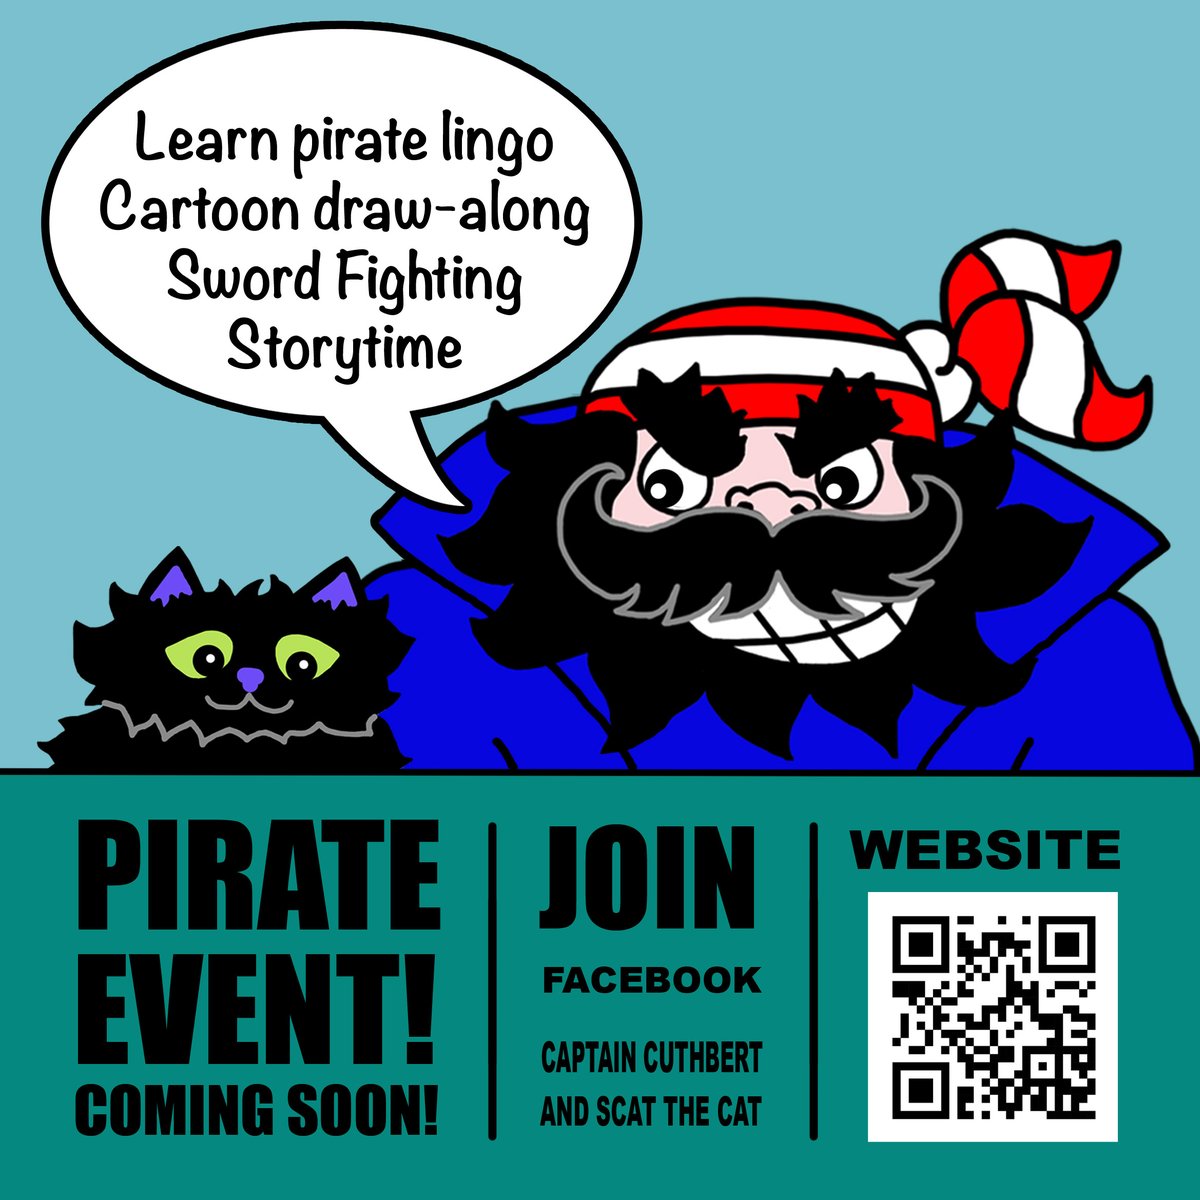 Date 2b confirmed 
Join Facebook  & or mailing list 4 updates facebook.com/CaptainCuthber…
Where #Glossop #Derbyshire 
Email
CaptainCuthbertandScattheCat@hotmail.com
Web
captaincuthbertscat.wixsite.com/website  
#pirate  #glossopdale #derbyshire #pirateevent #glossopevent #childrensevent #pirateevent